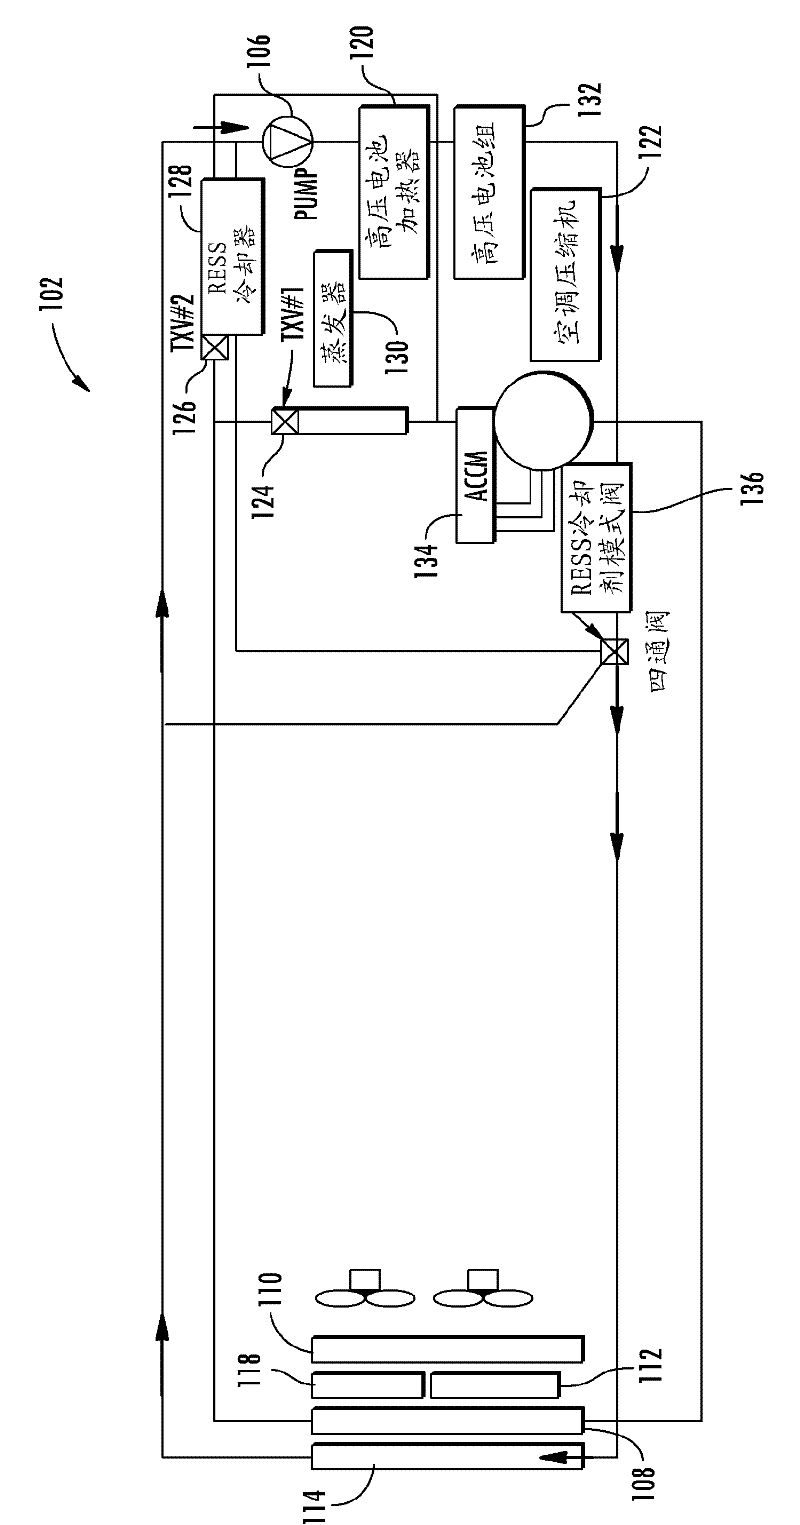 Systems and methods for determining the target thermal conditioning value to control a rechargeable energy storage system